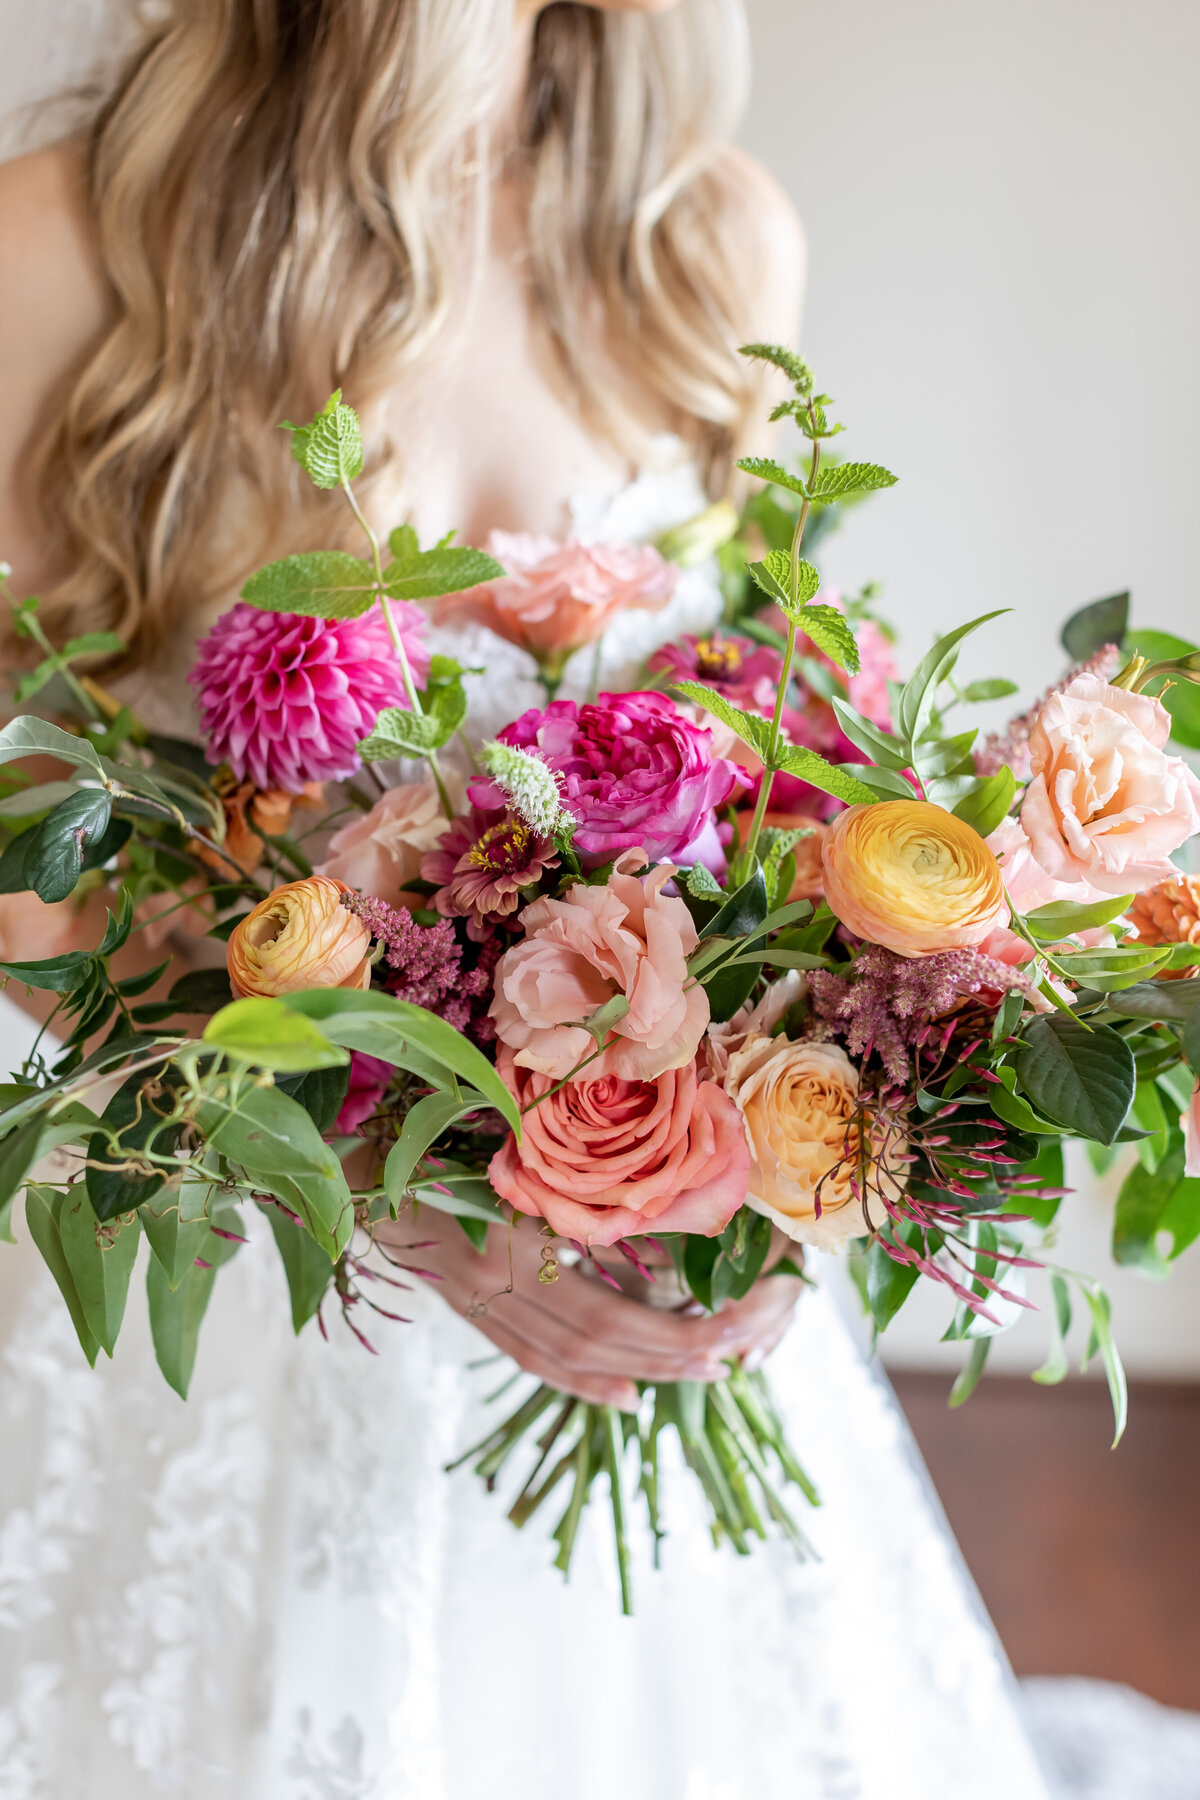 Large Bridal Bouquet with orange, pink, and  green